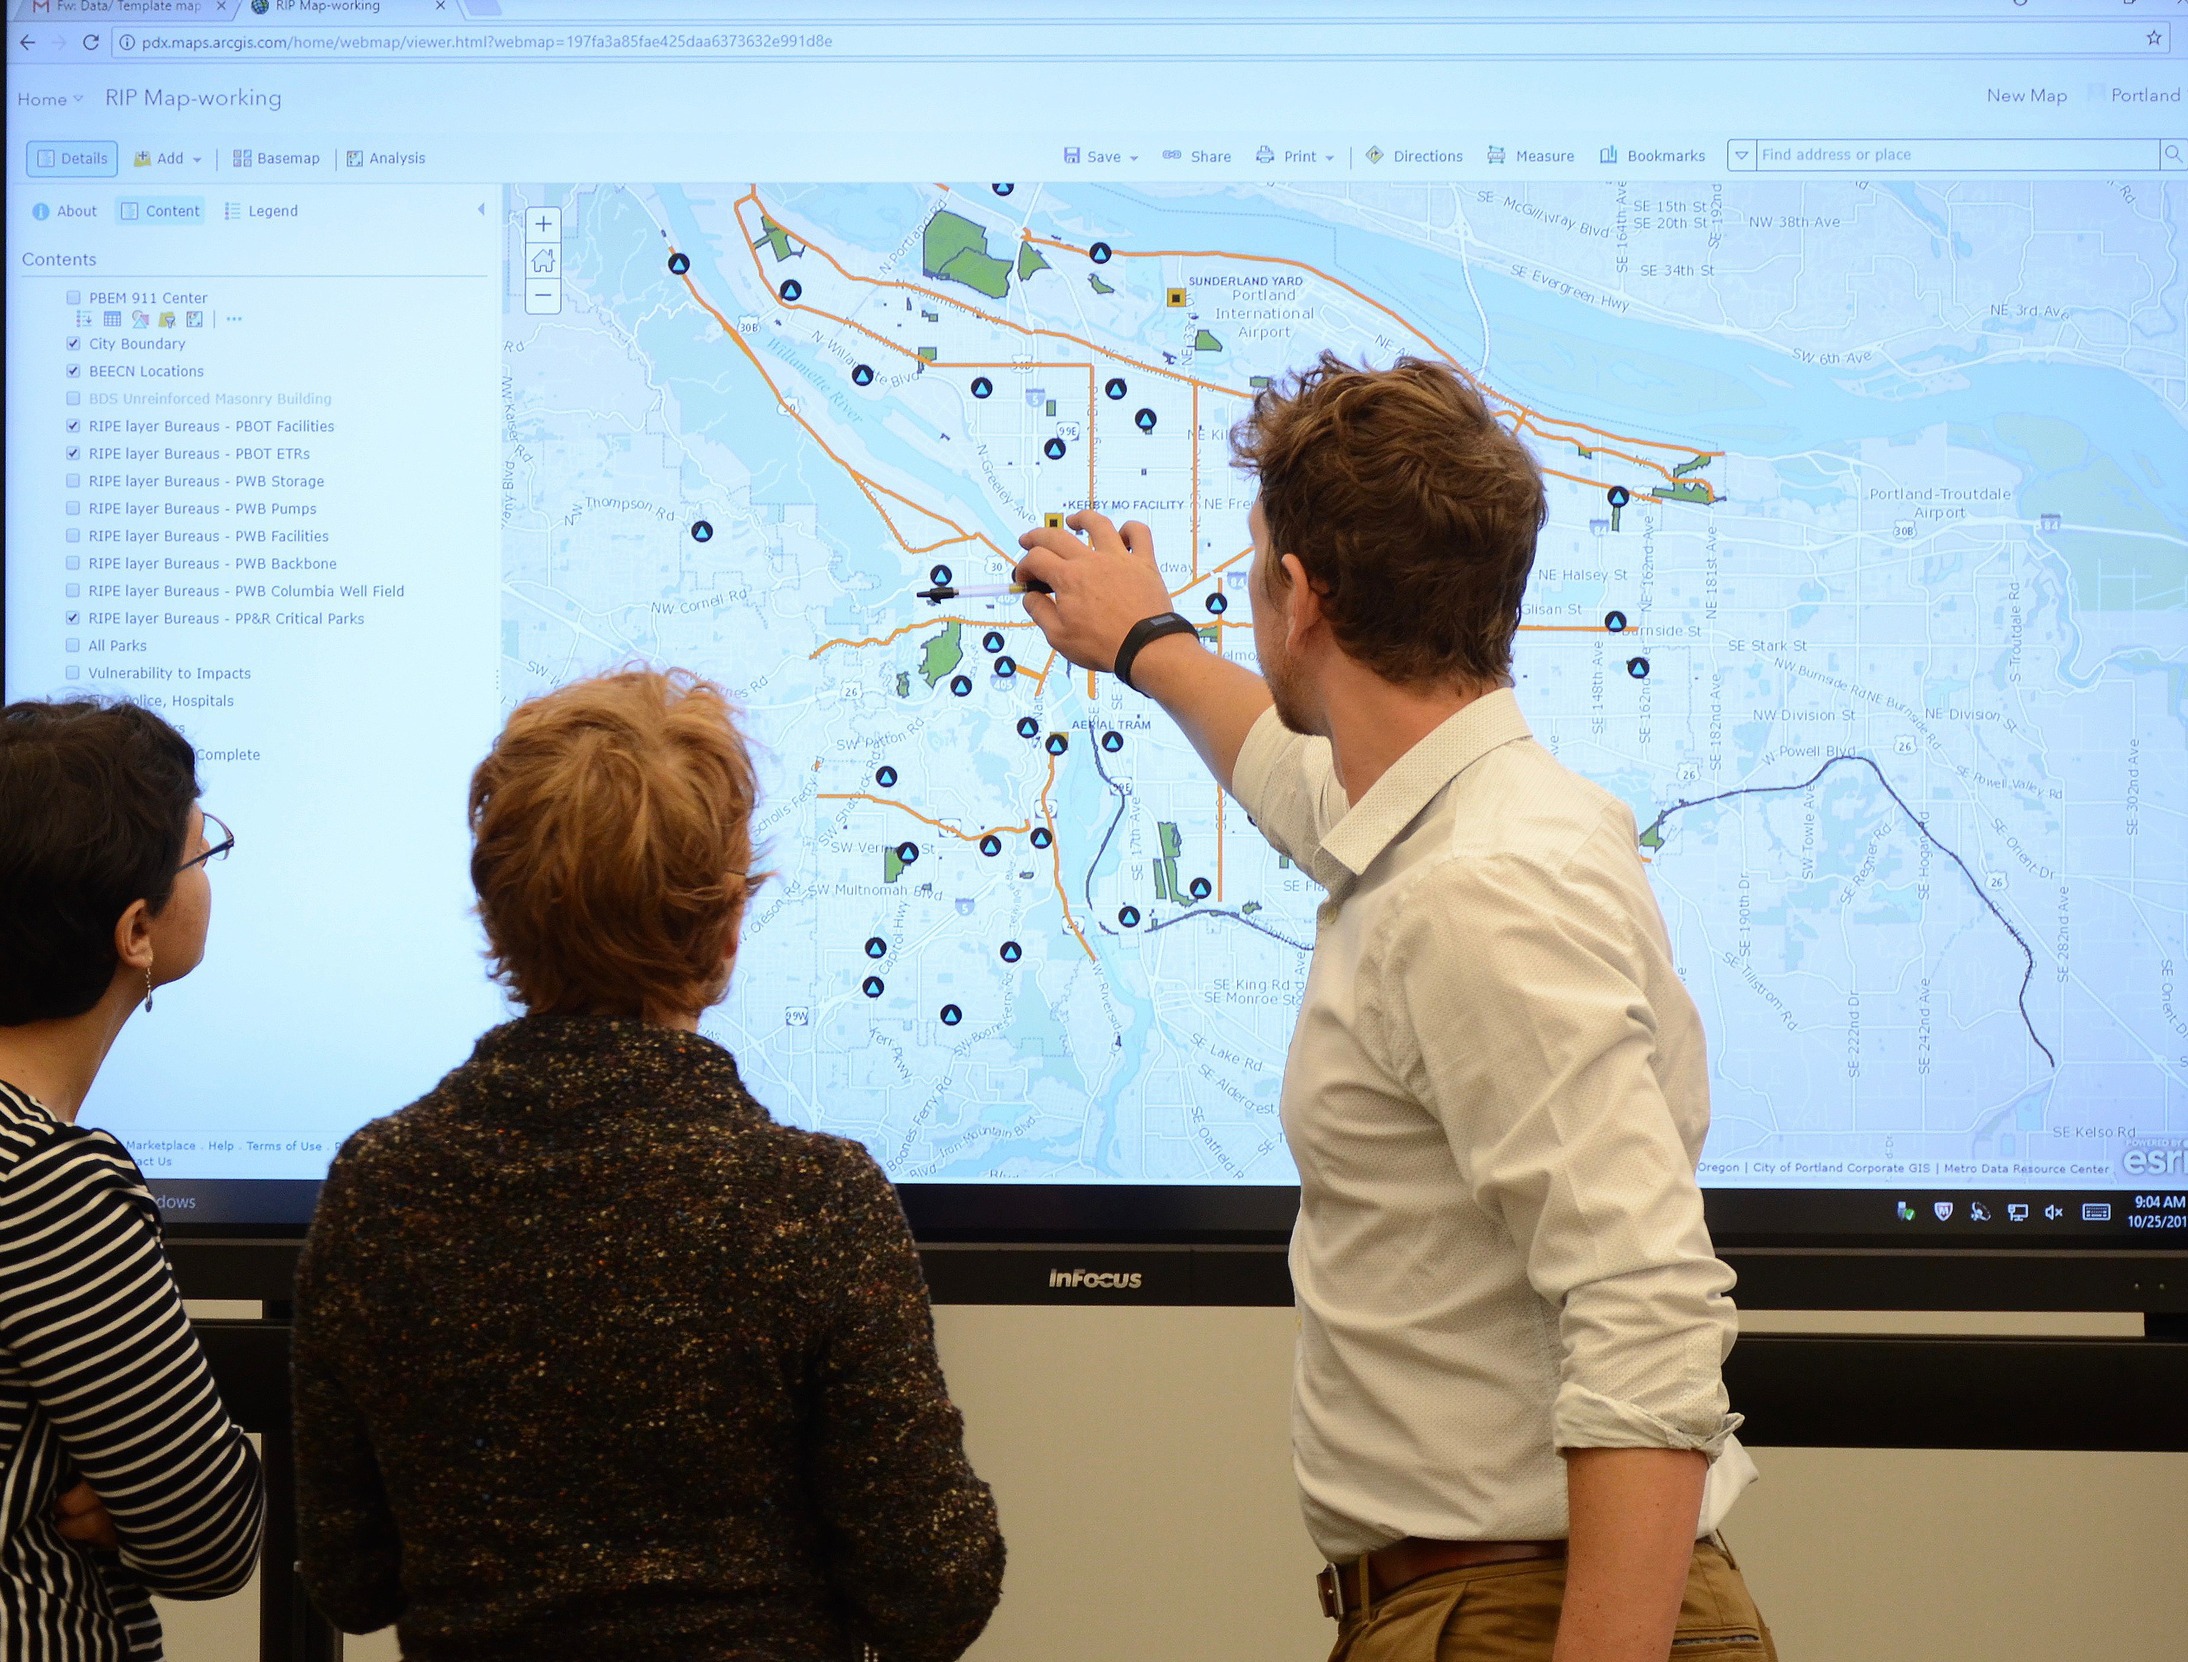 Three people face a large screen with a map of Portland on it. Person furthest right is touching screen to expand the view